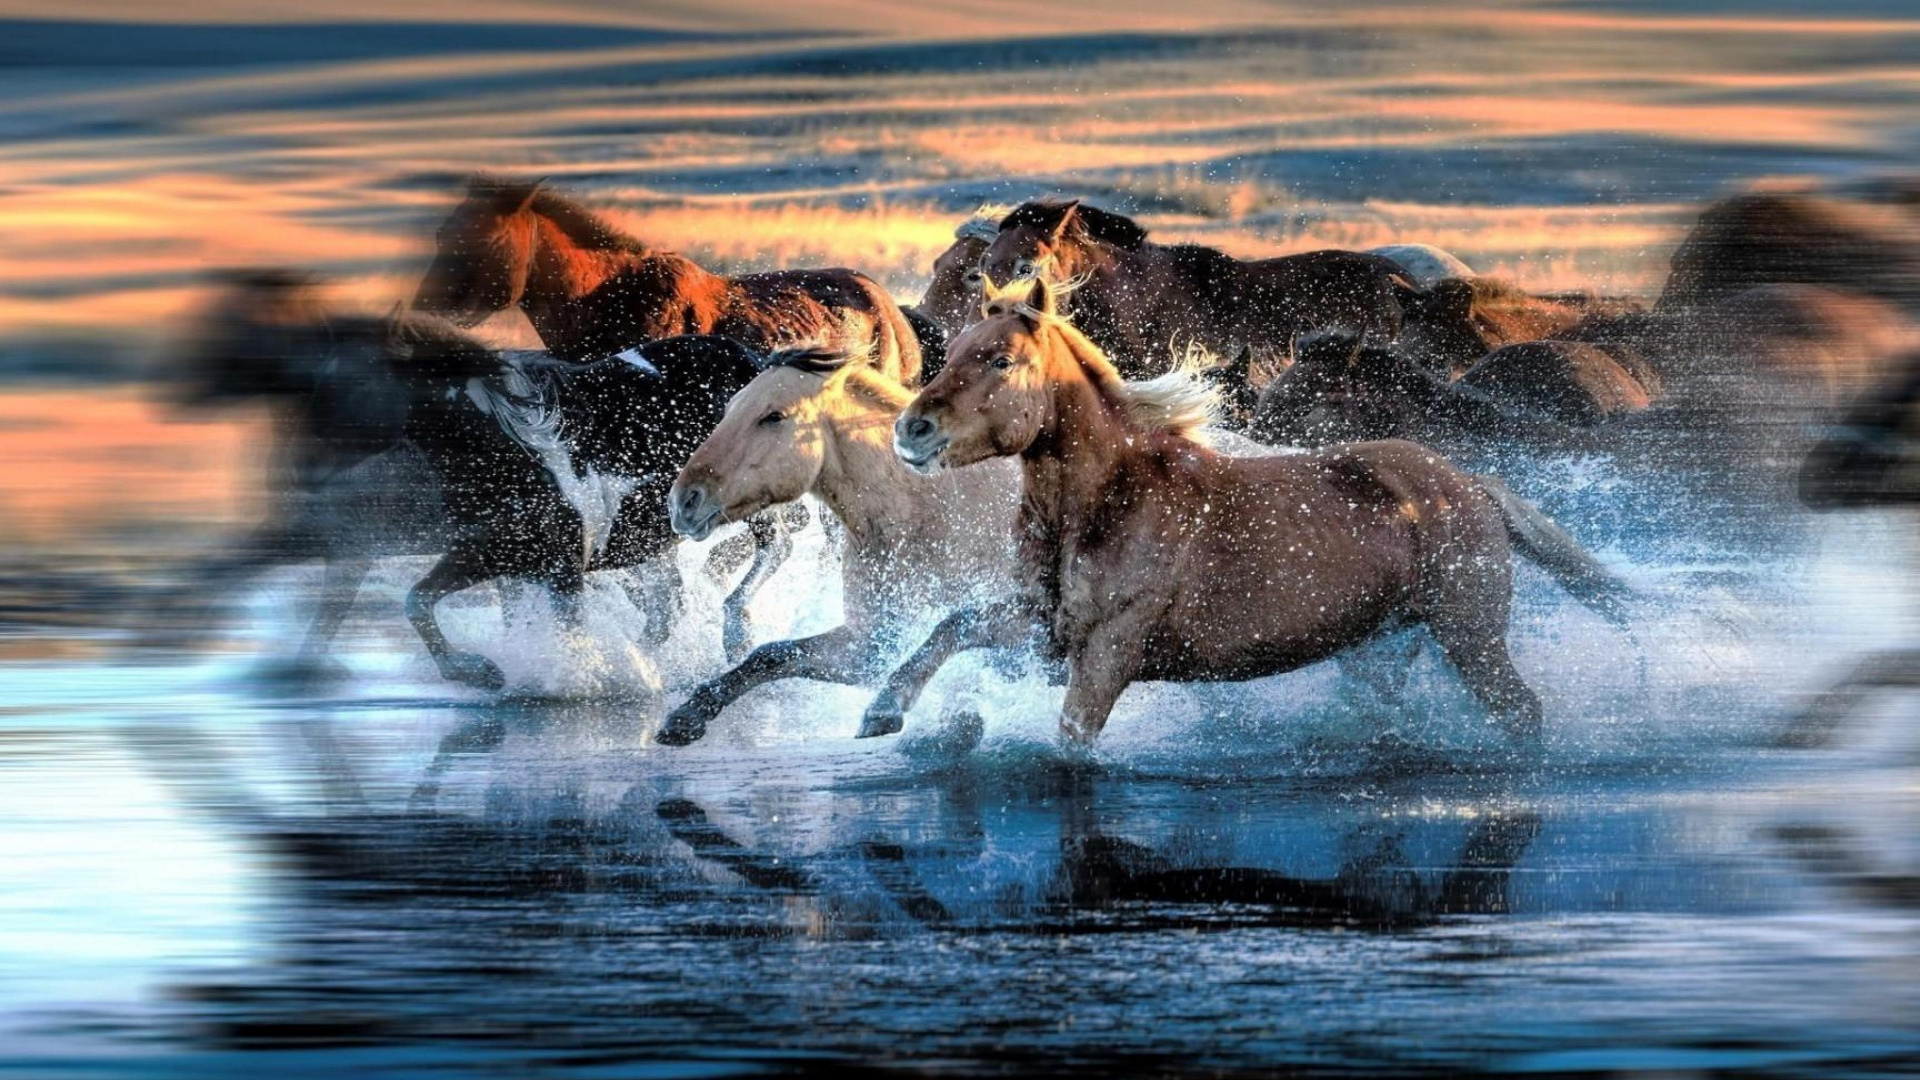 Brown and White Horse Running on Water During Daytime. Wallpaper in 1920x1080 Resolution